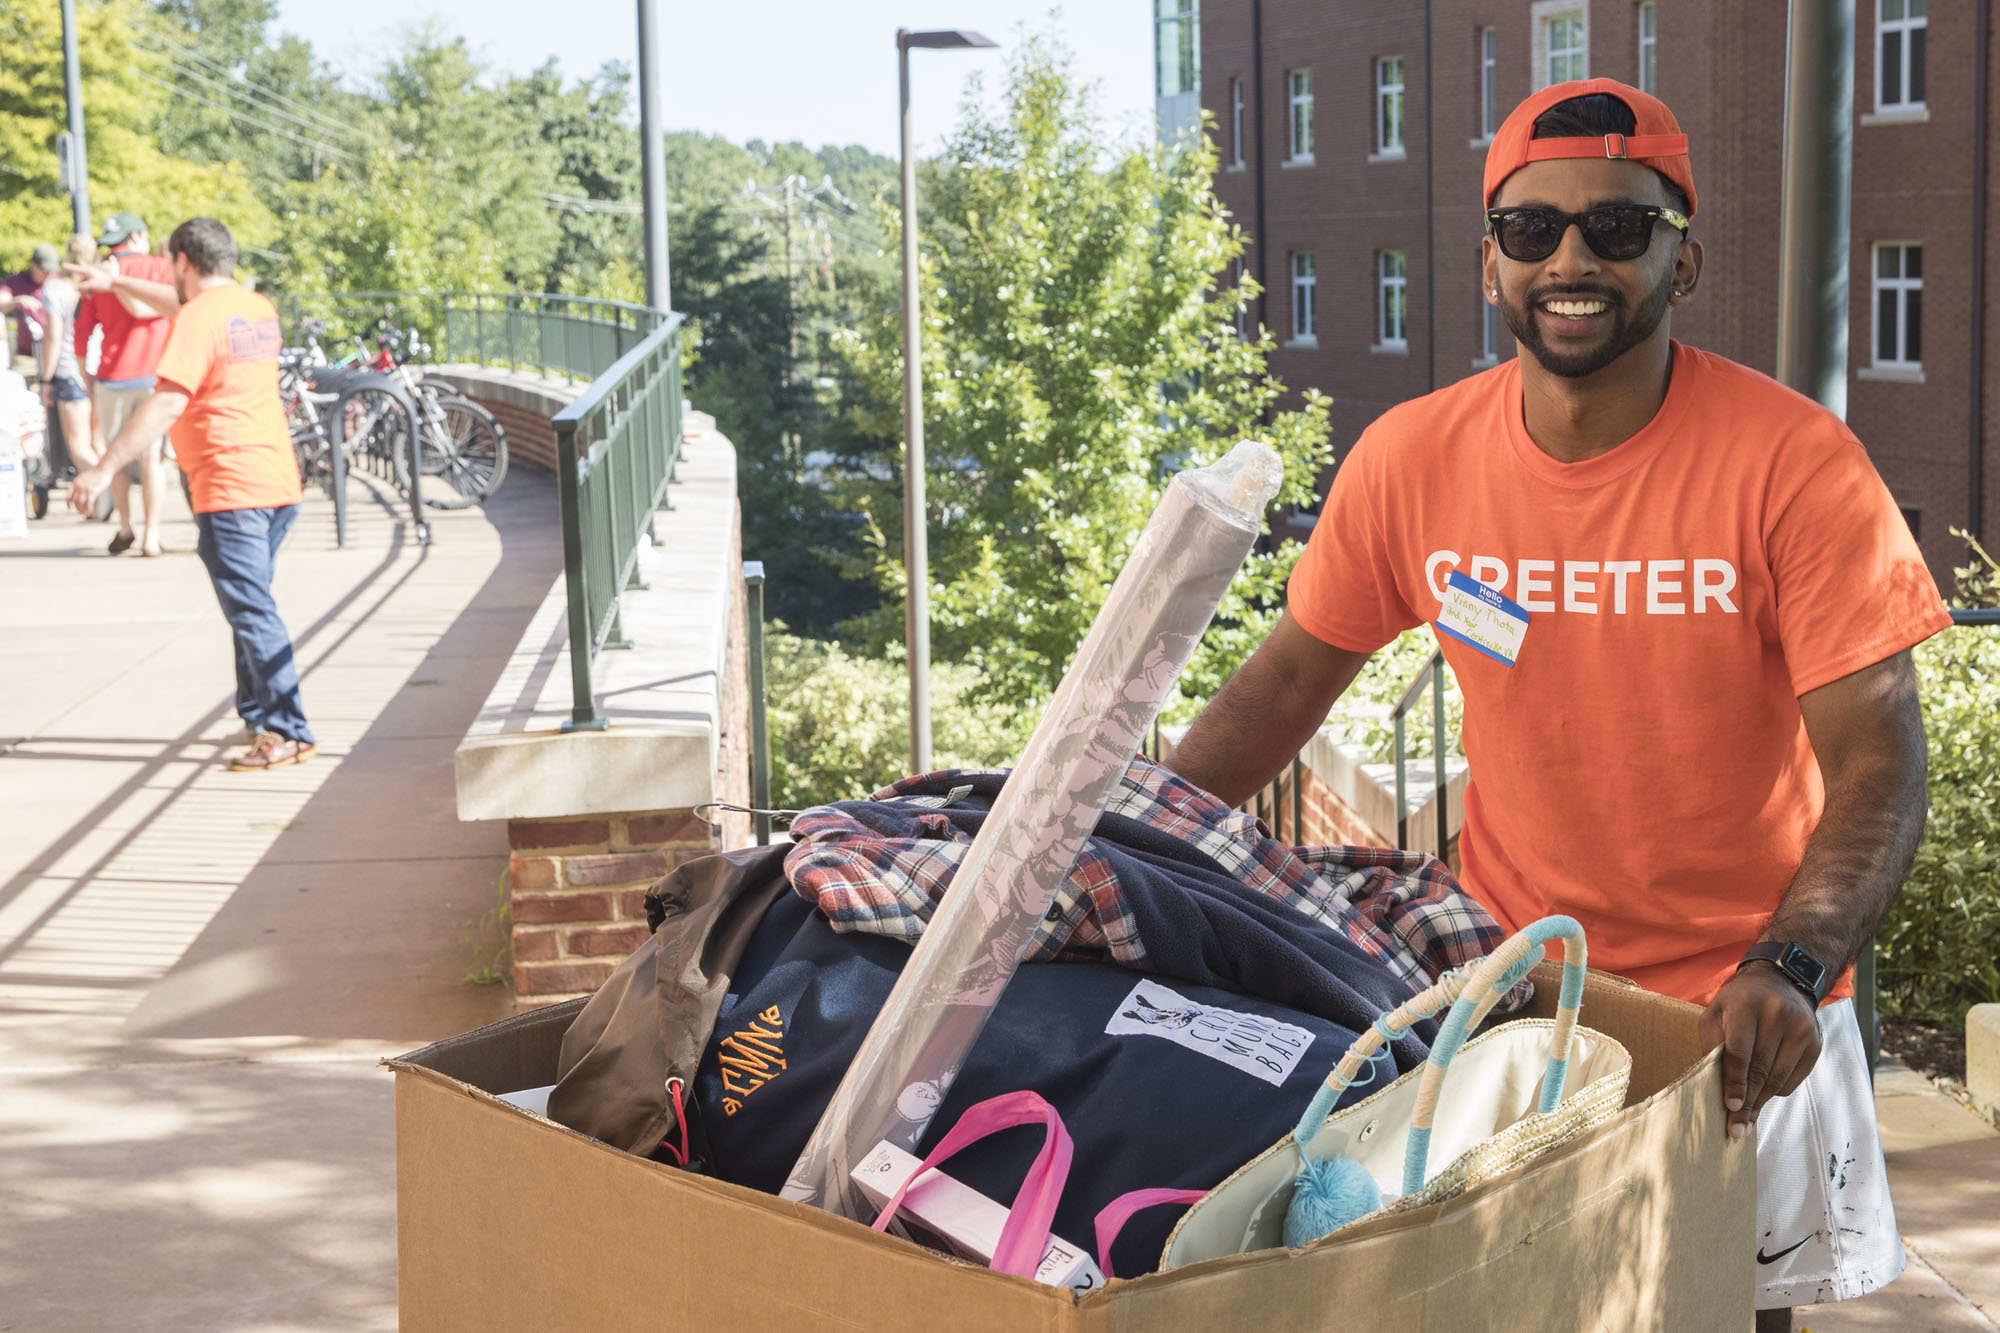 Greeter in a bright orange shirt helps move a box of students belongings up a sidewalk